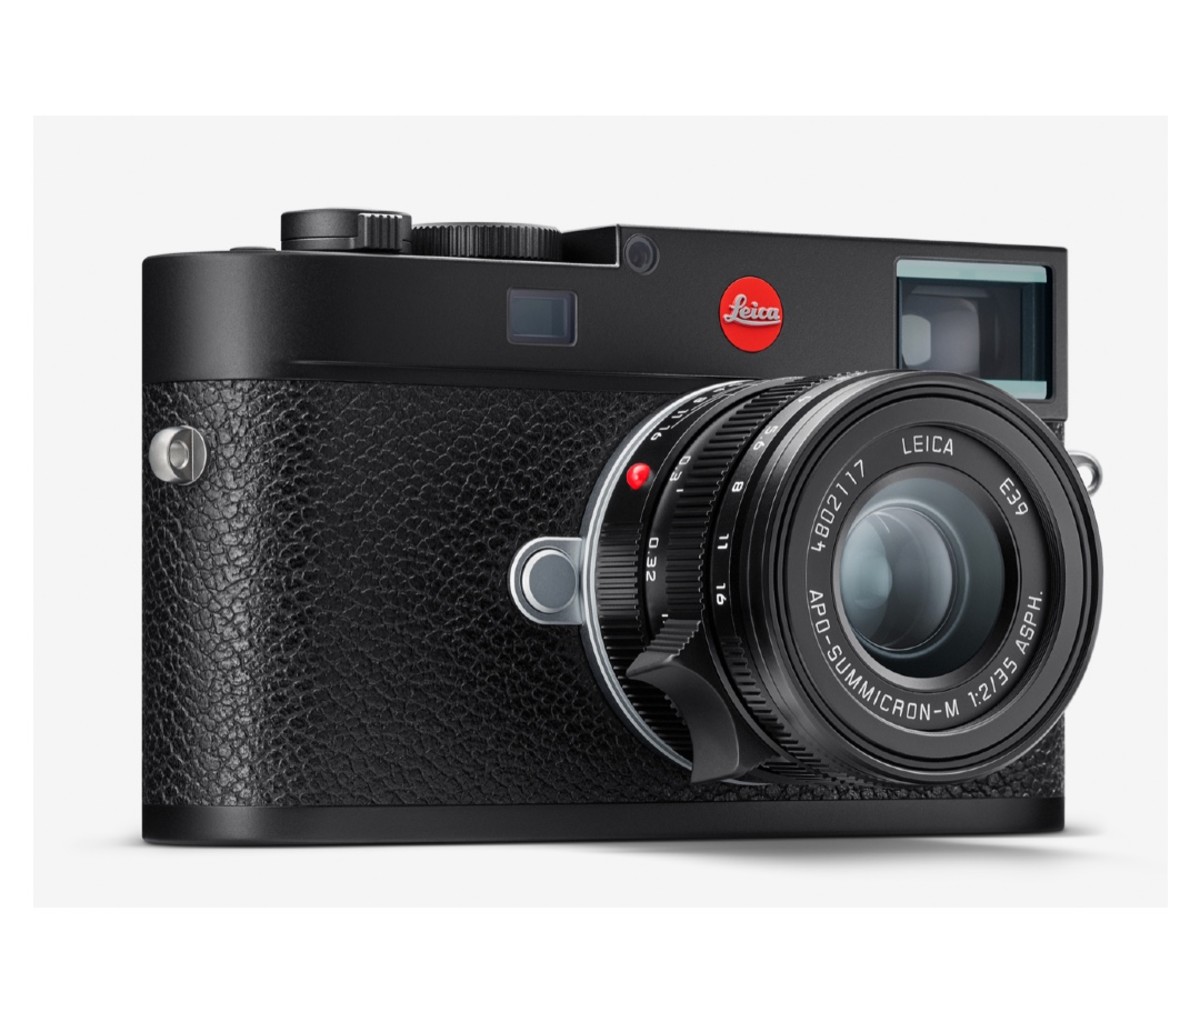 Make beautiful pictures with the beautiful Leica M11 camera.